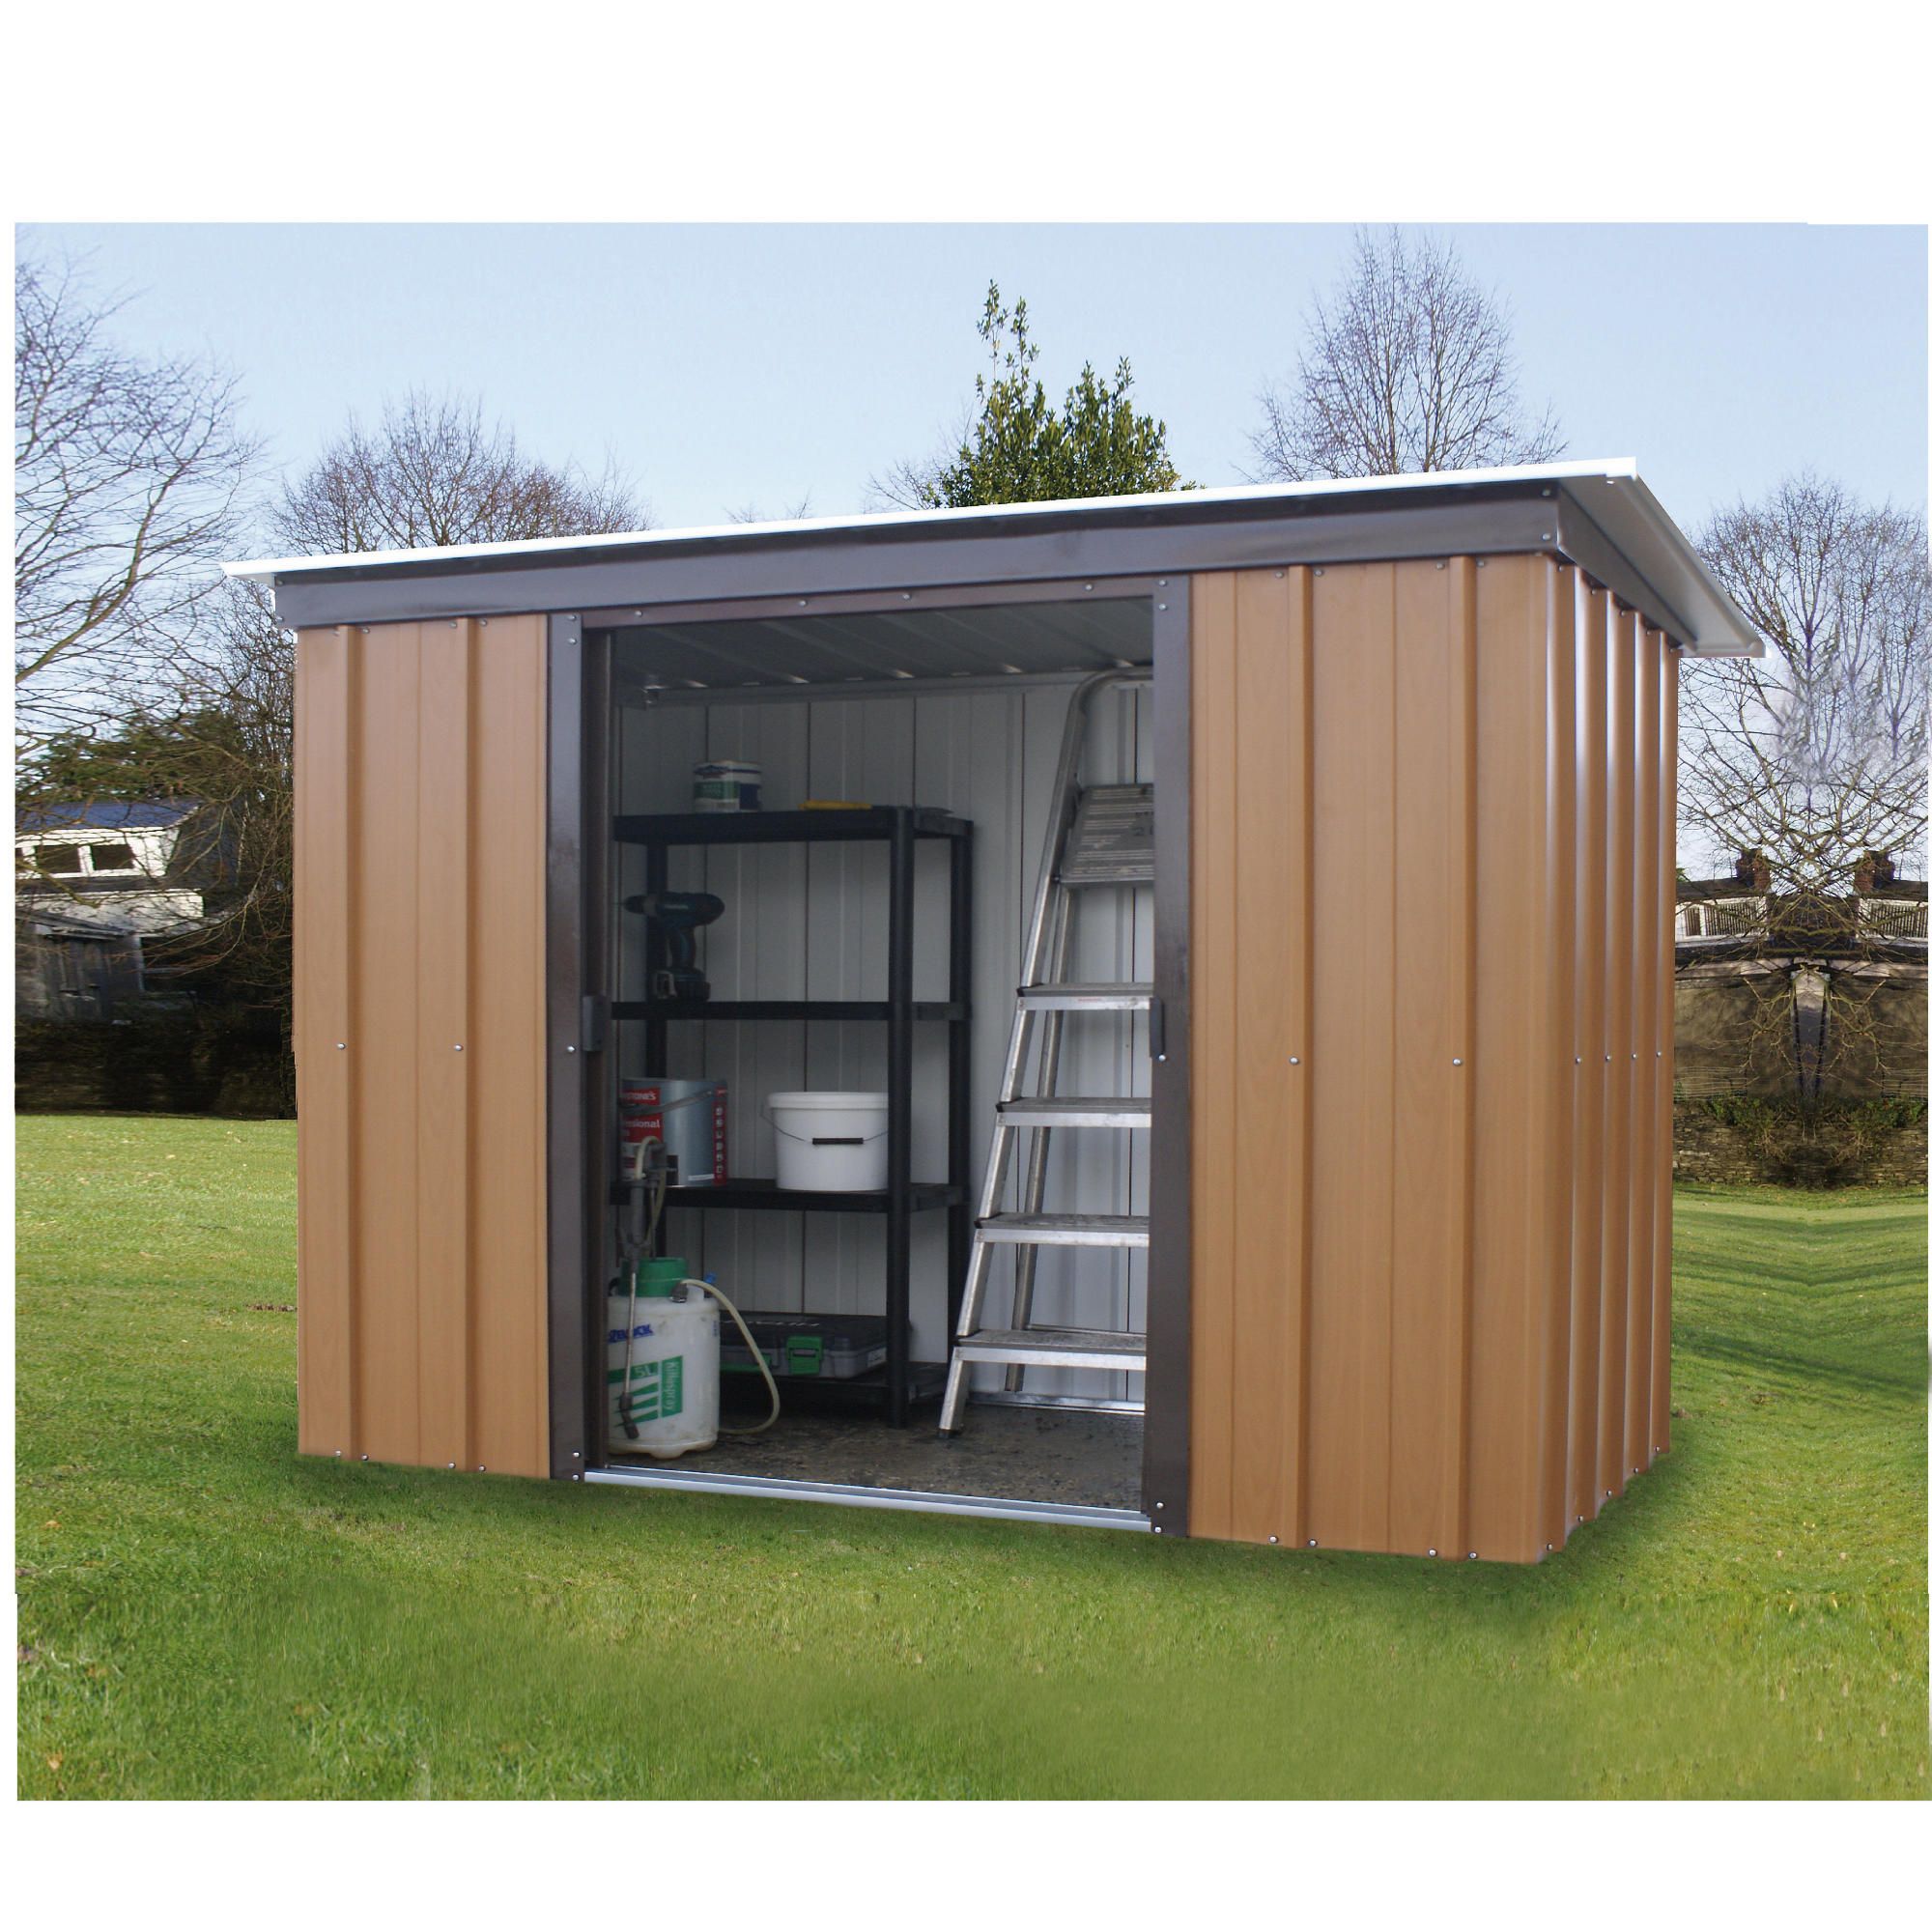 Shed kits for sale australia, 6x4 metal shed with floor, gambrel barn 